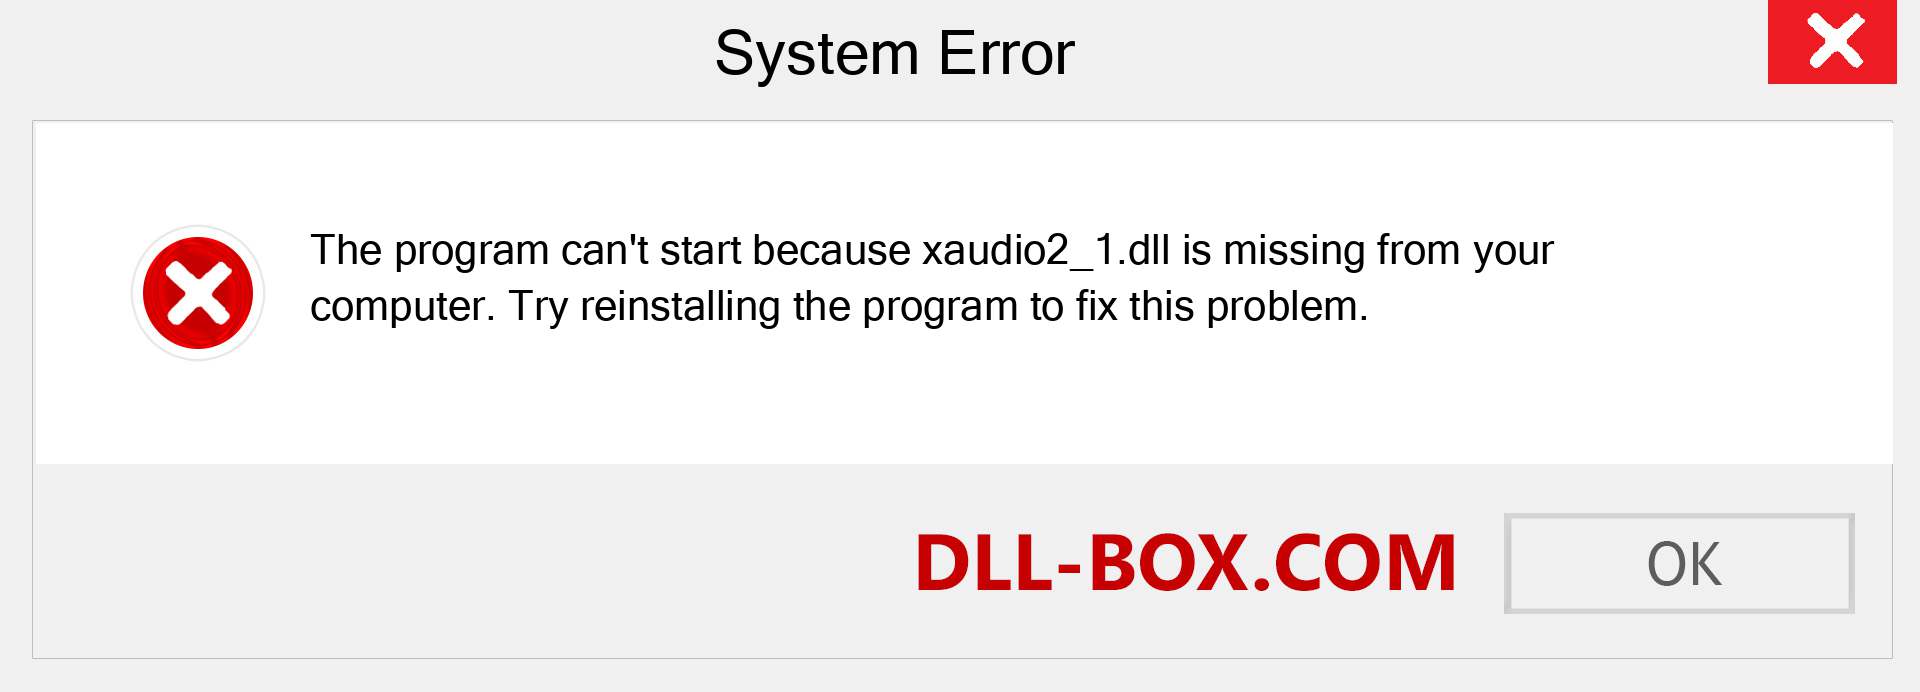  xaudio2_1.dll file is missing?. Download for Windows 7, 8, 10 - Fix  xaudio2_1 dll Missing Error on Windows, photos, images